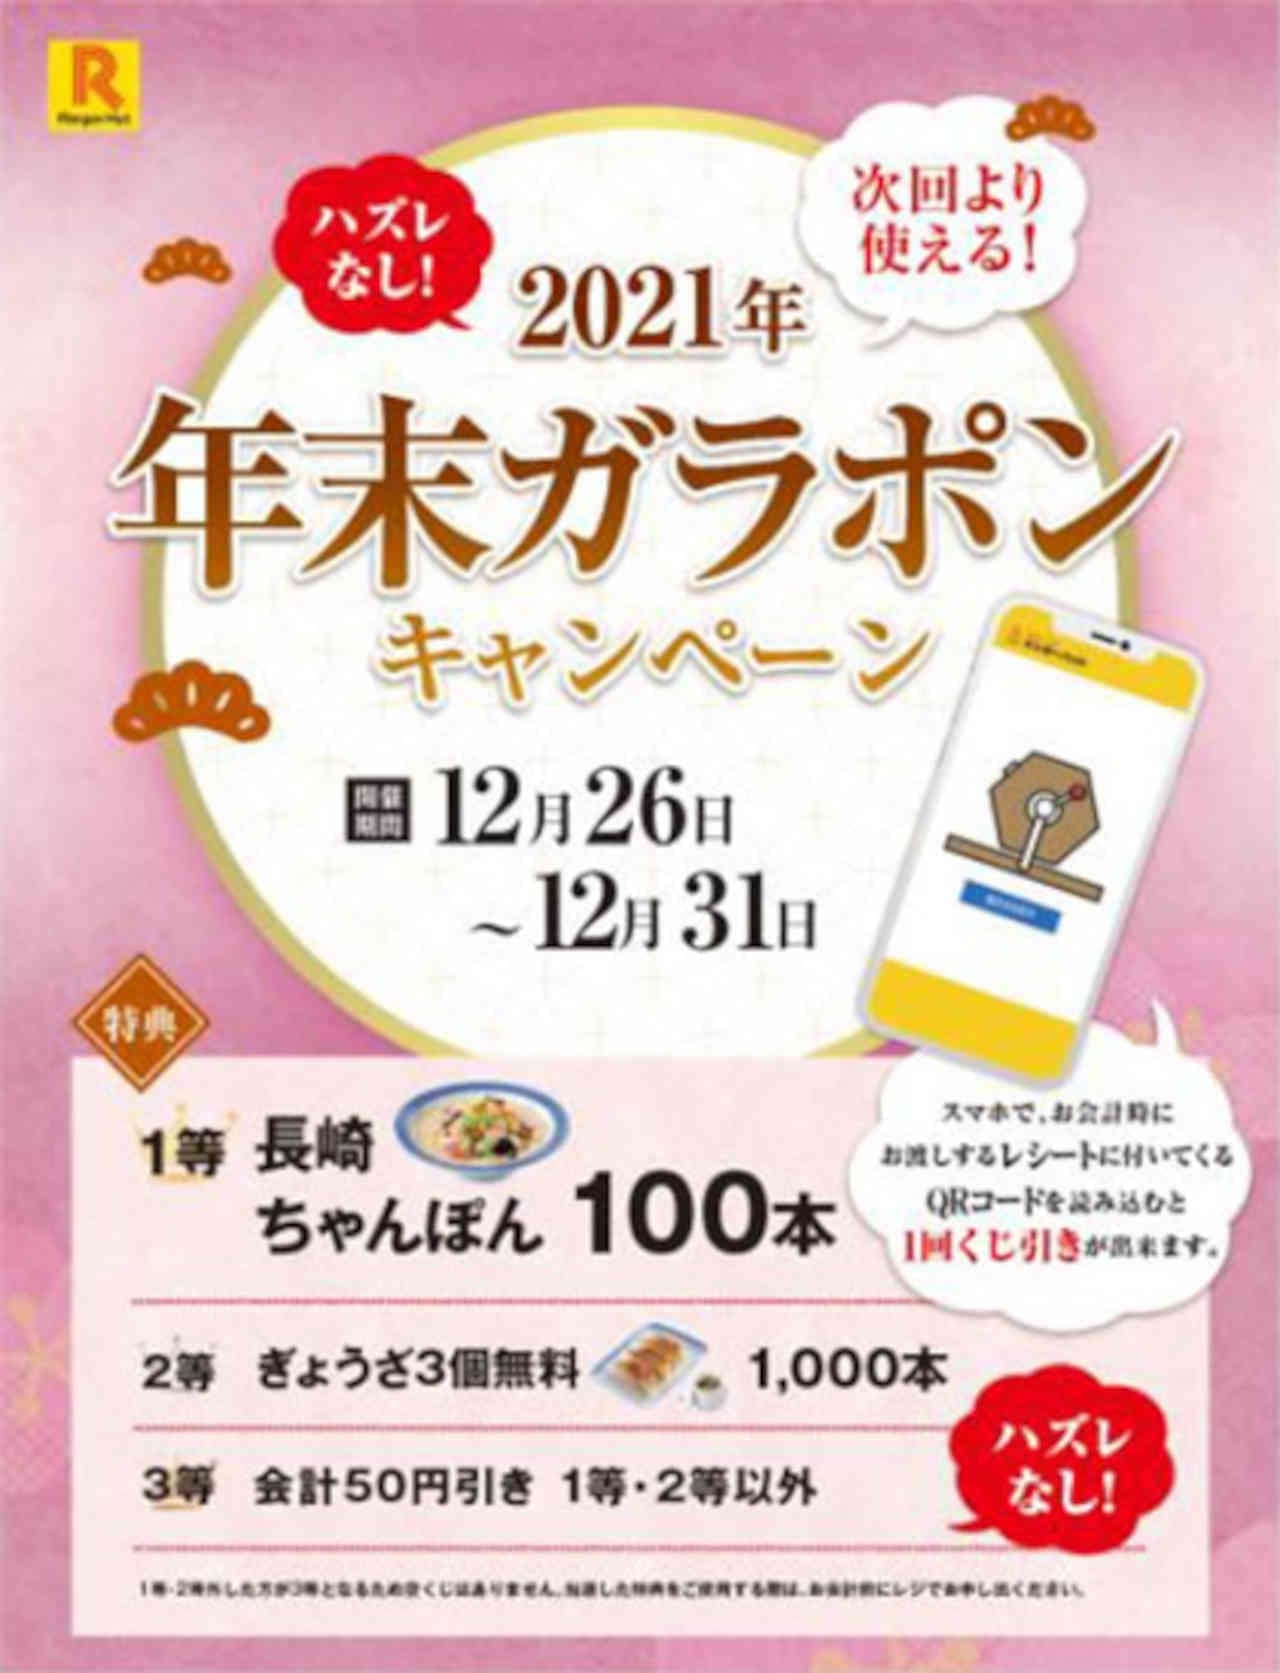 Ringer Hut "Nagasaki Champon Voucher" etc. "Year-end Garapon Campaign" and "New Year Omikuji Campaign"